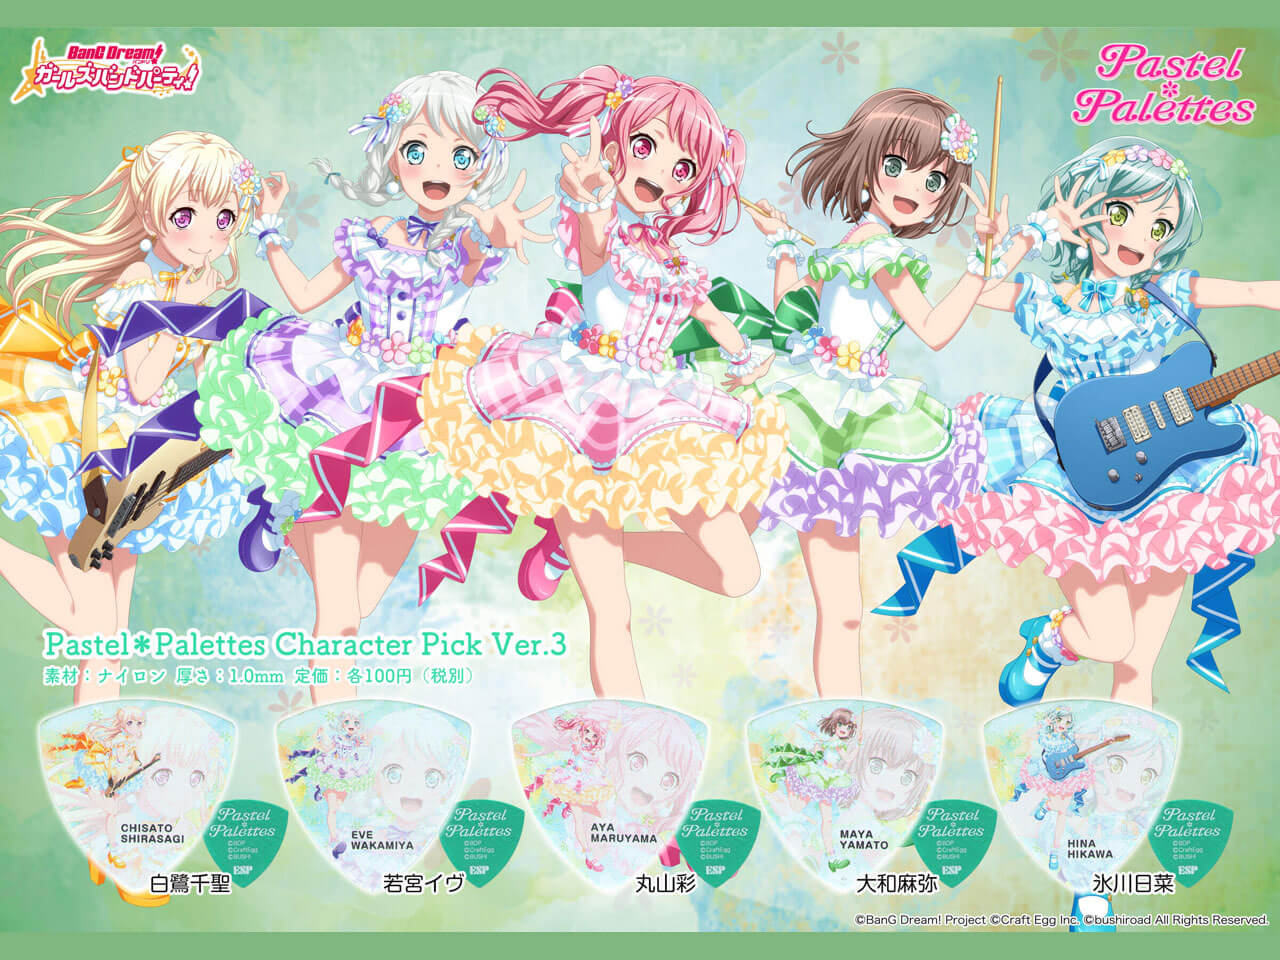 【ESP×BanG Dream!コラボピック】Pastel*Palettes Character Pick Ver.3 "氷川日菜"10枚セット（GBP HINA PASTEL PALETTES 3）